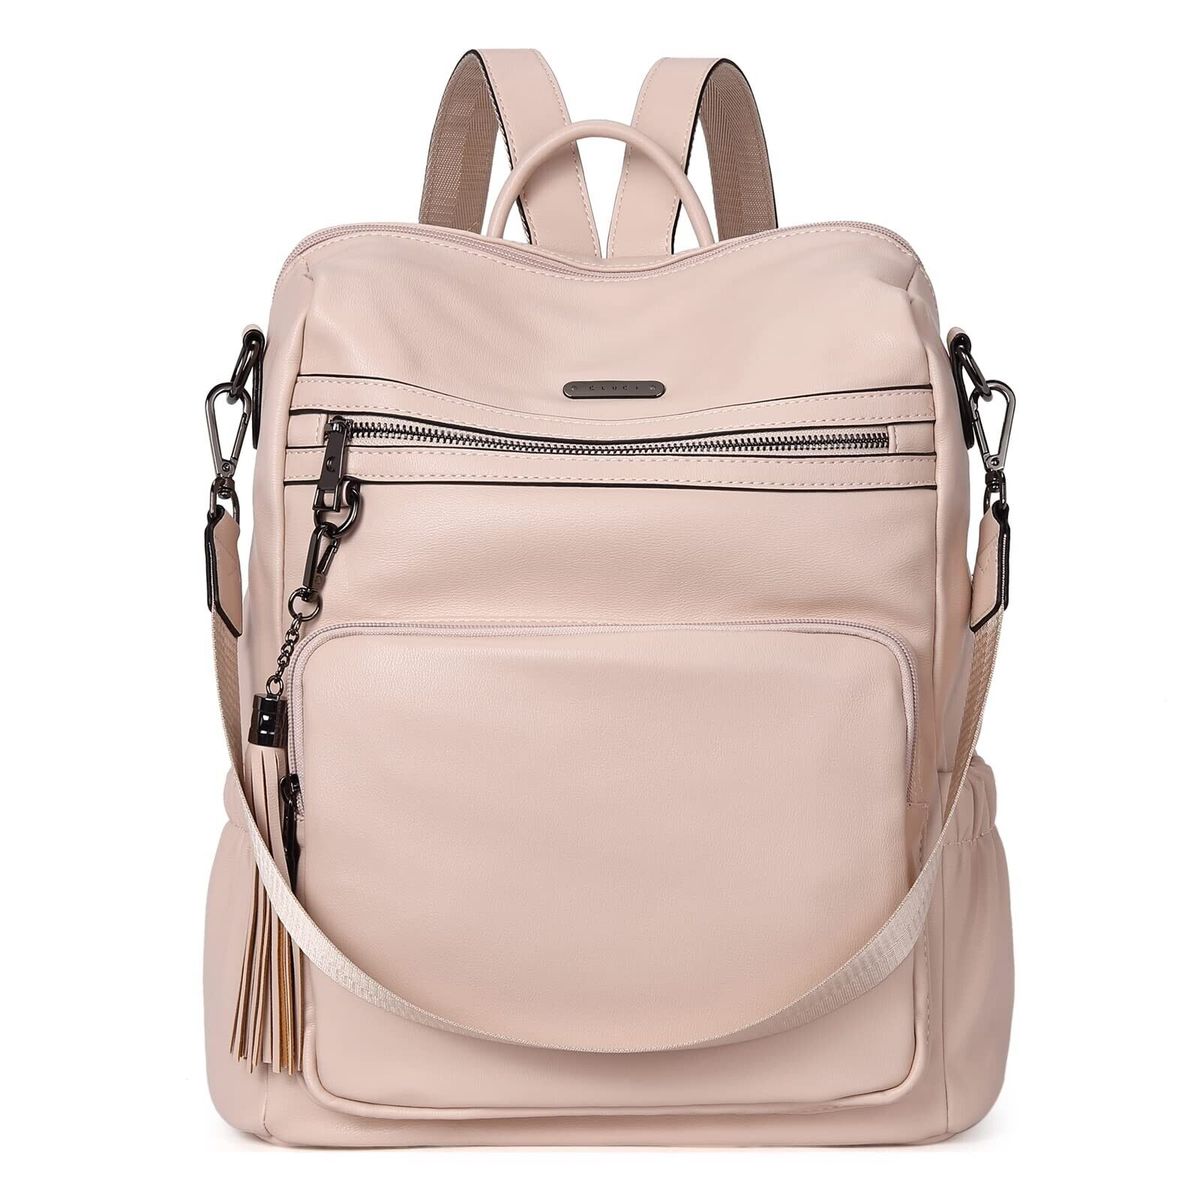 Back To College Backpacks & Bags - 42 suggestions curated by